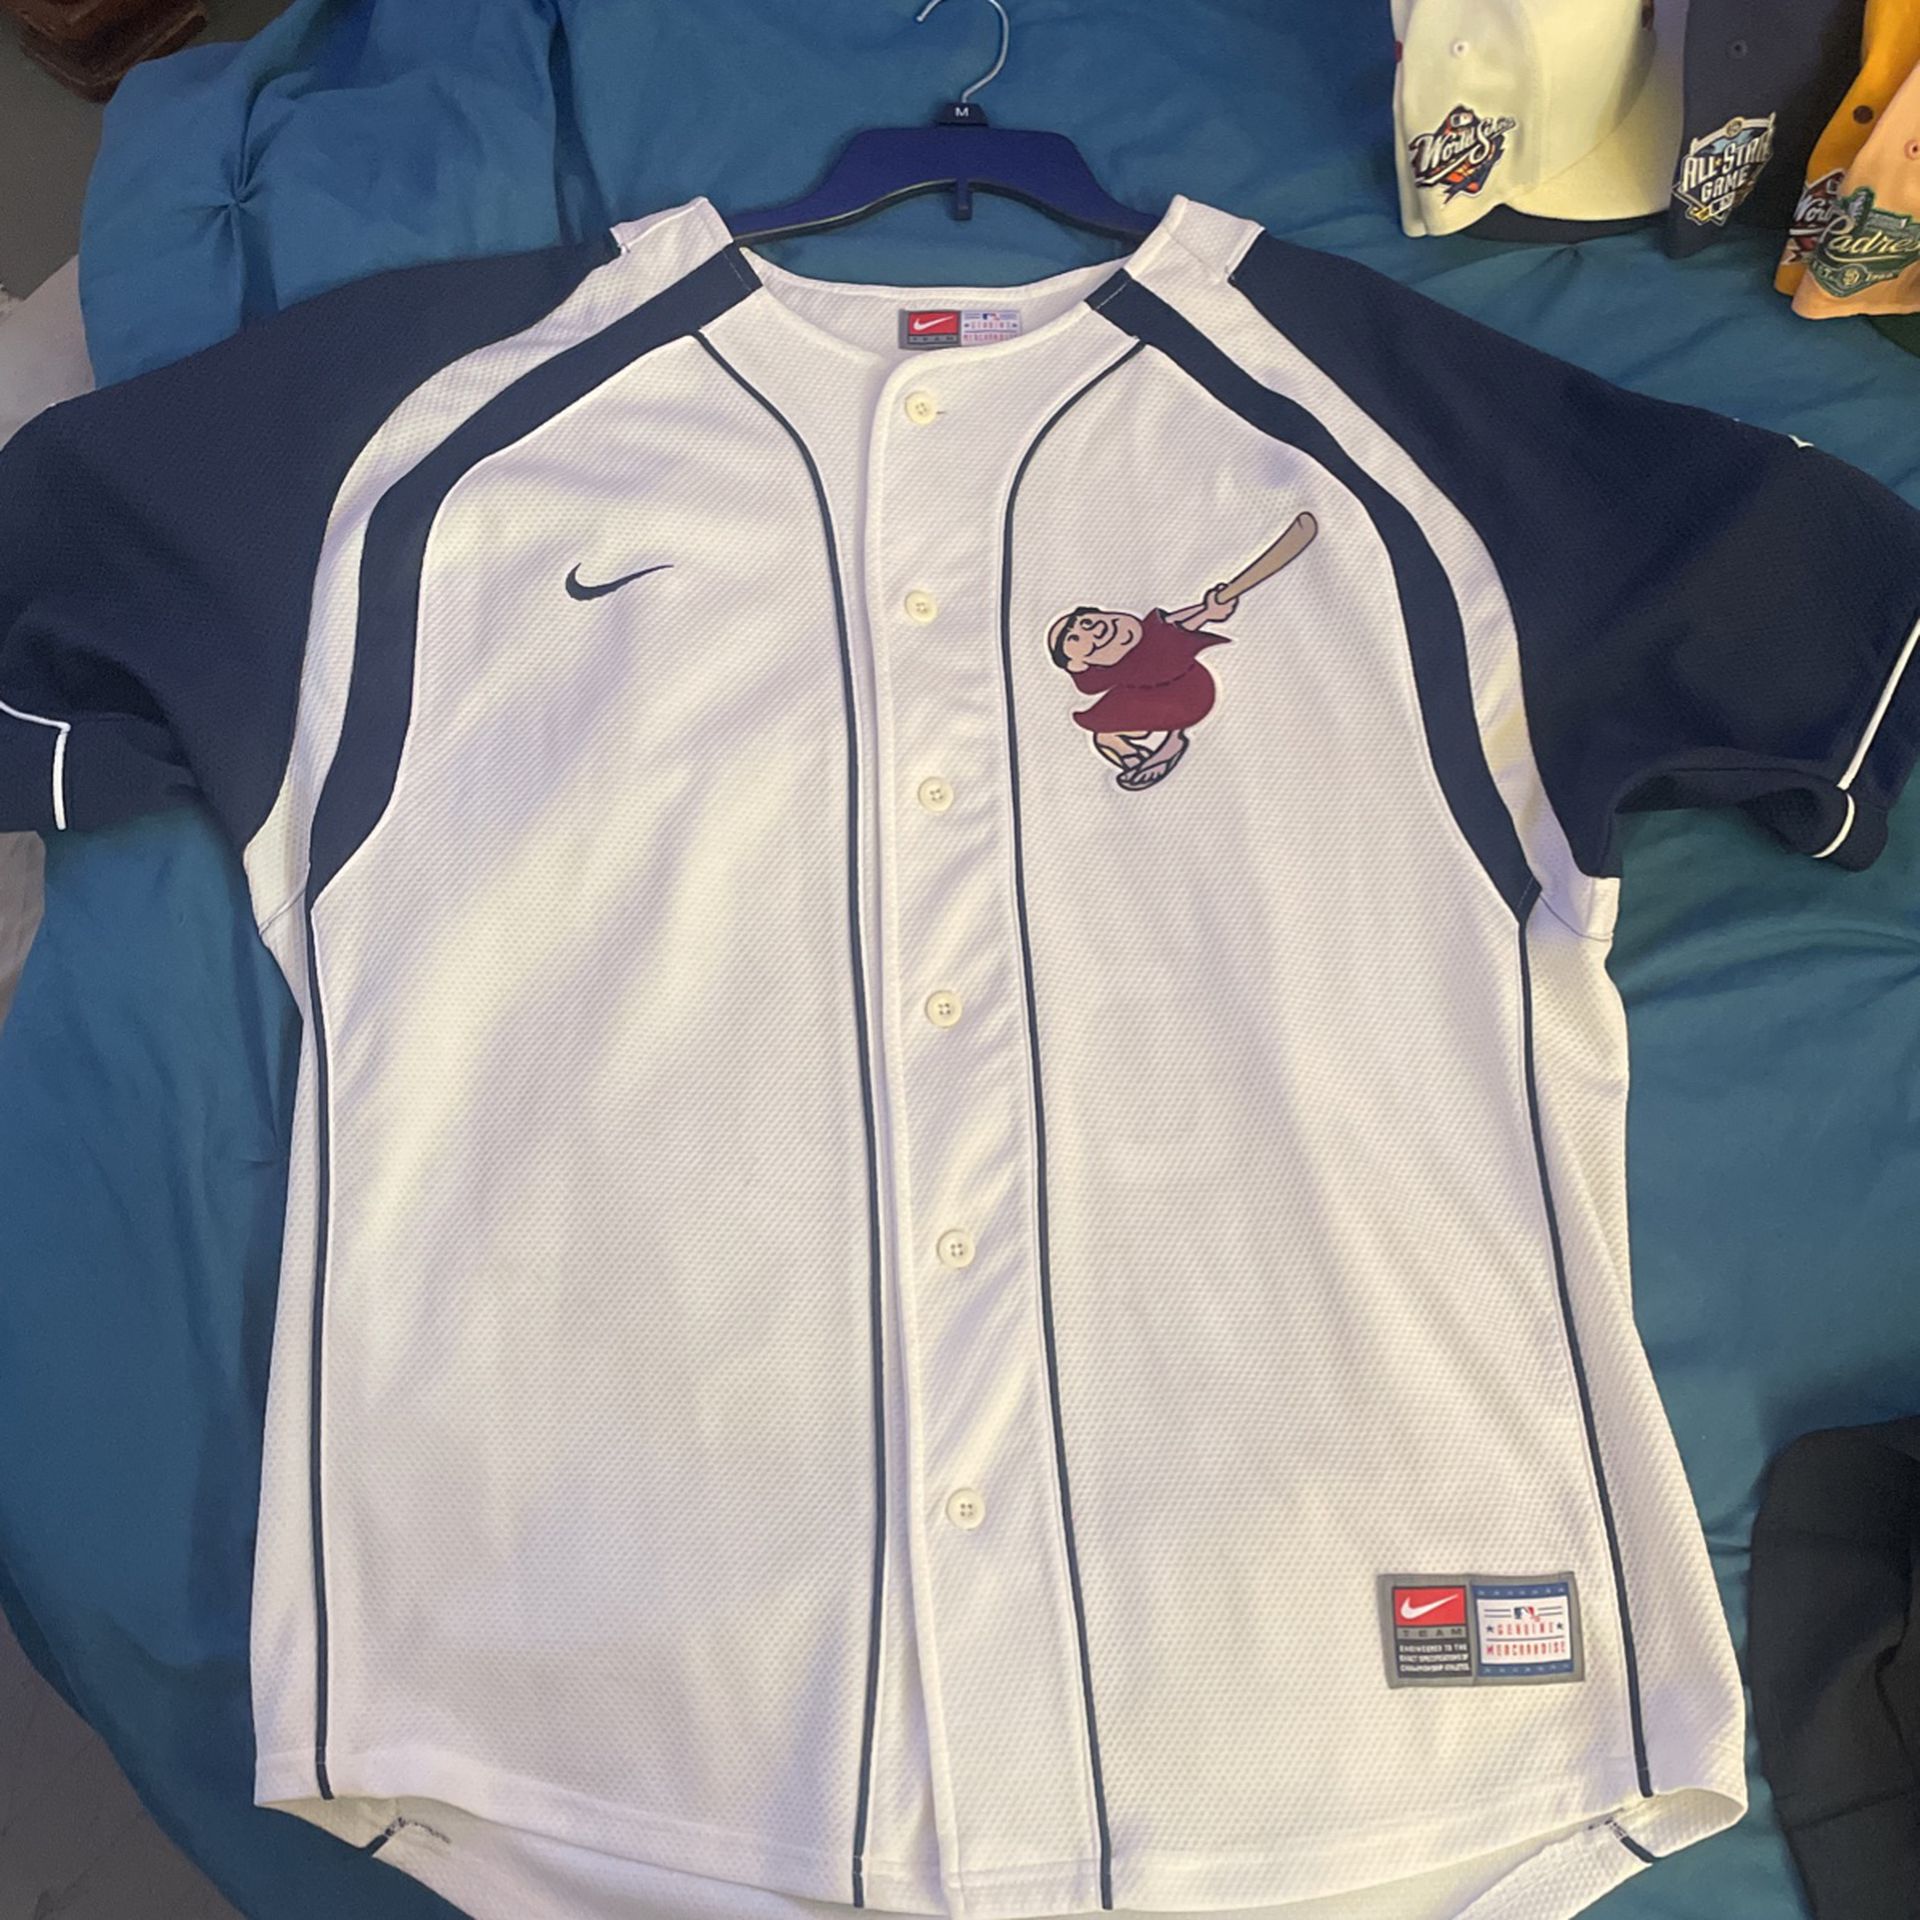 Padres jersey for Sale in San Diego, CA - OfferUp